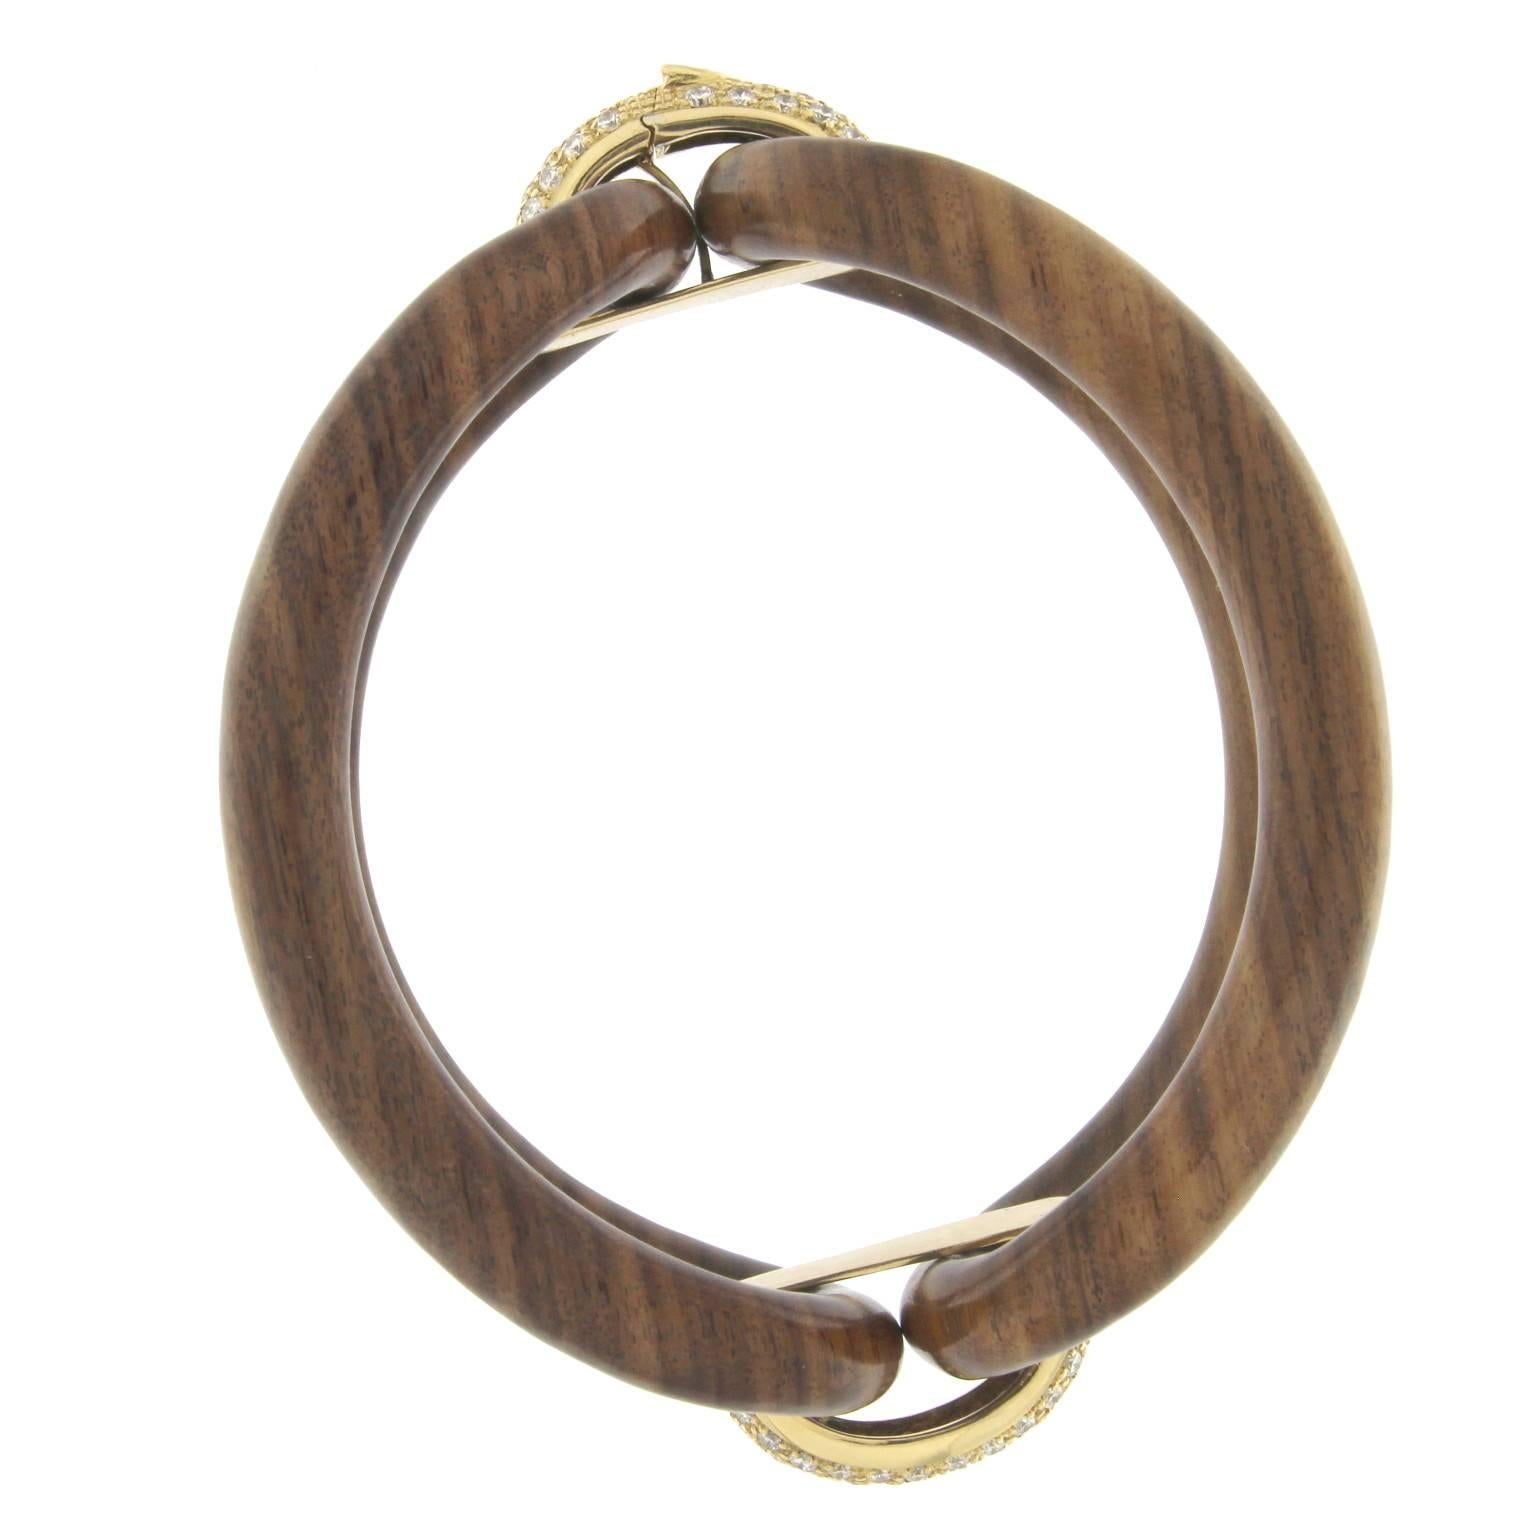 Roberta collection bangle in 18 kt  rose wood  and yellow gold and white diamonds 
The newest and more popular collection of his year

the total weight of the gold is  gr 11.70
the total weight of the white diamonds is ct 1.60 - color GH clarity